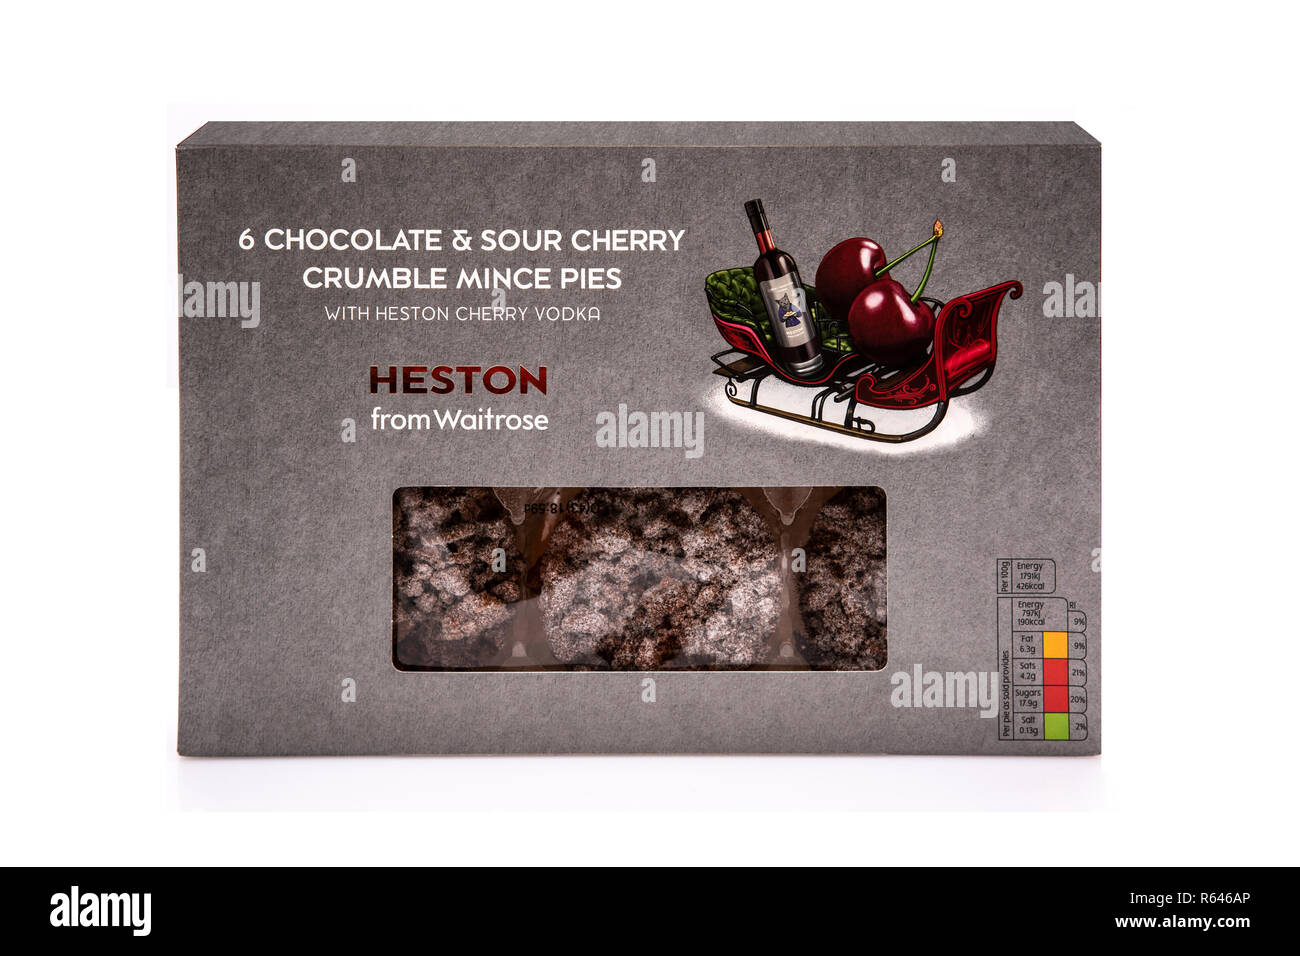 SWINDON, UK - DECEMBER 2, 2018:  Heston From Waitrose 6 Chocolate and Sour Cherry Crumble Mince Pies with Heston Cherry Vodka on a white background Stock Photo